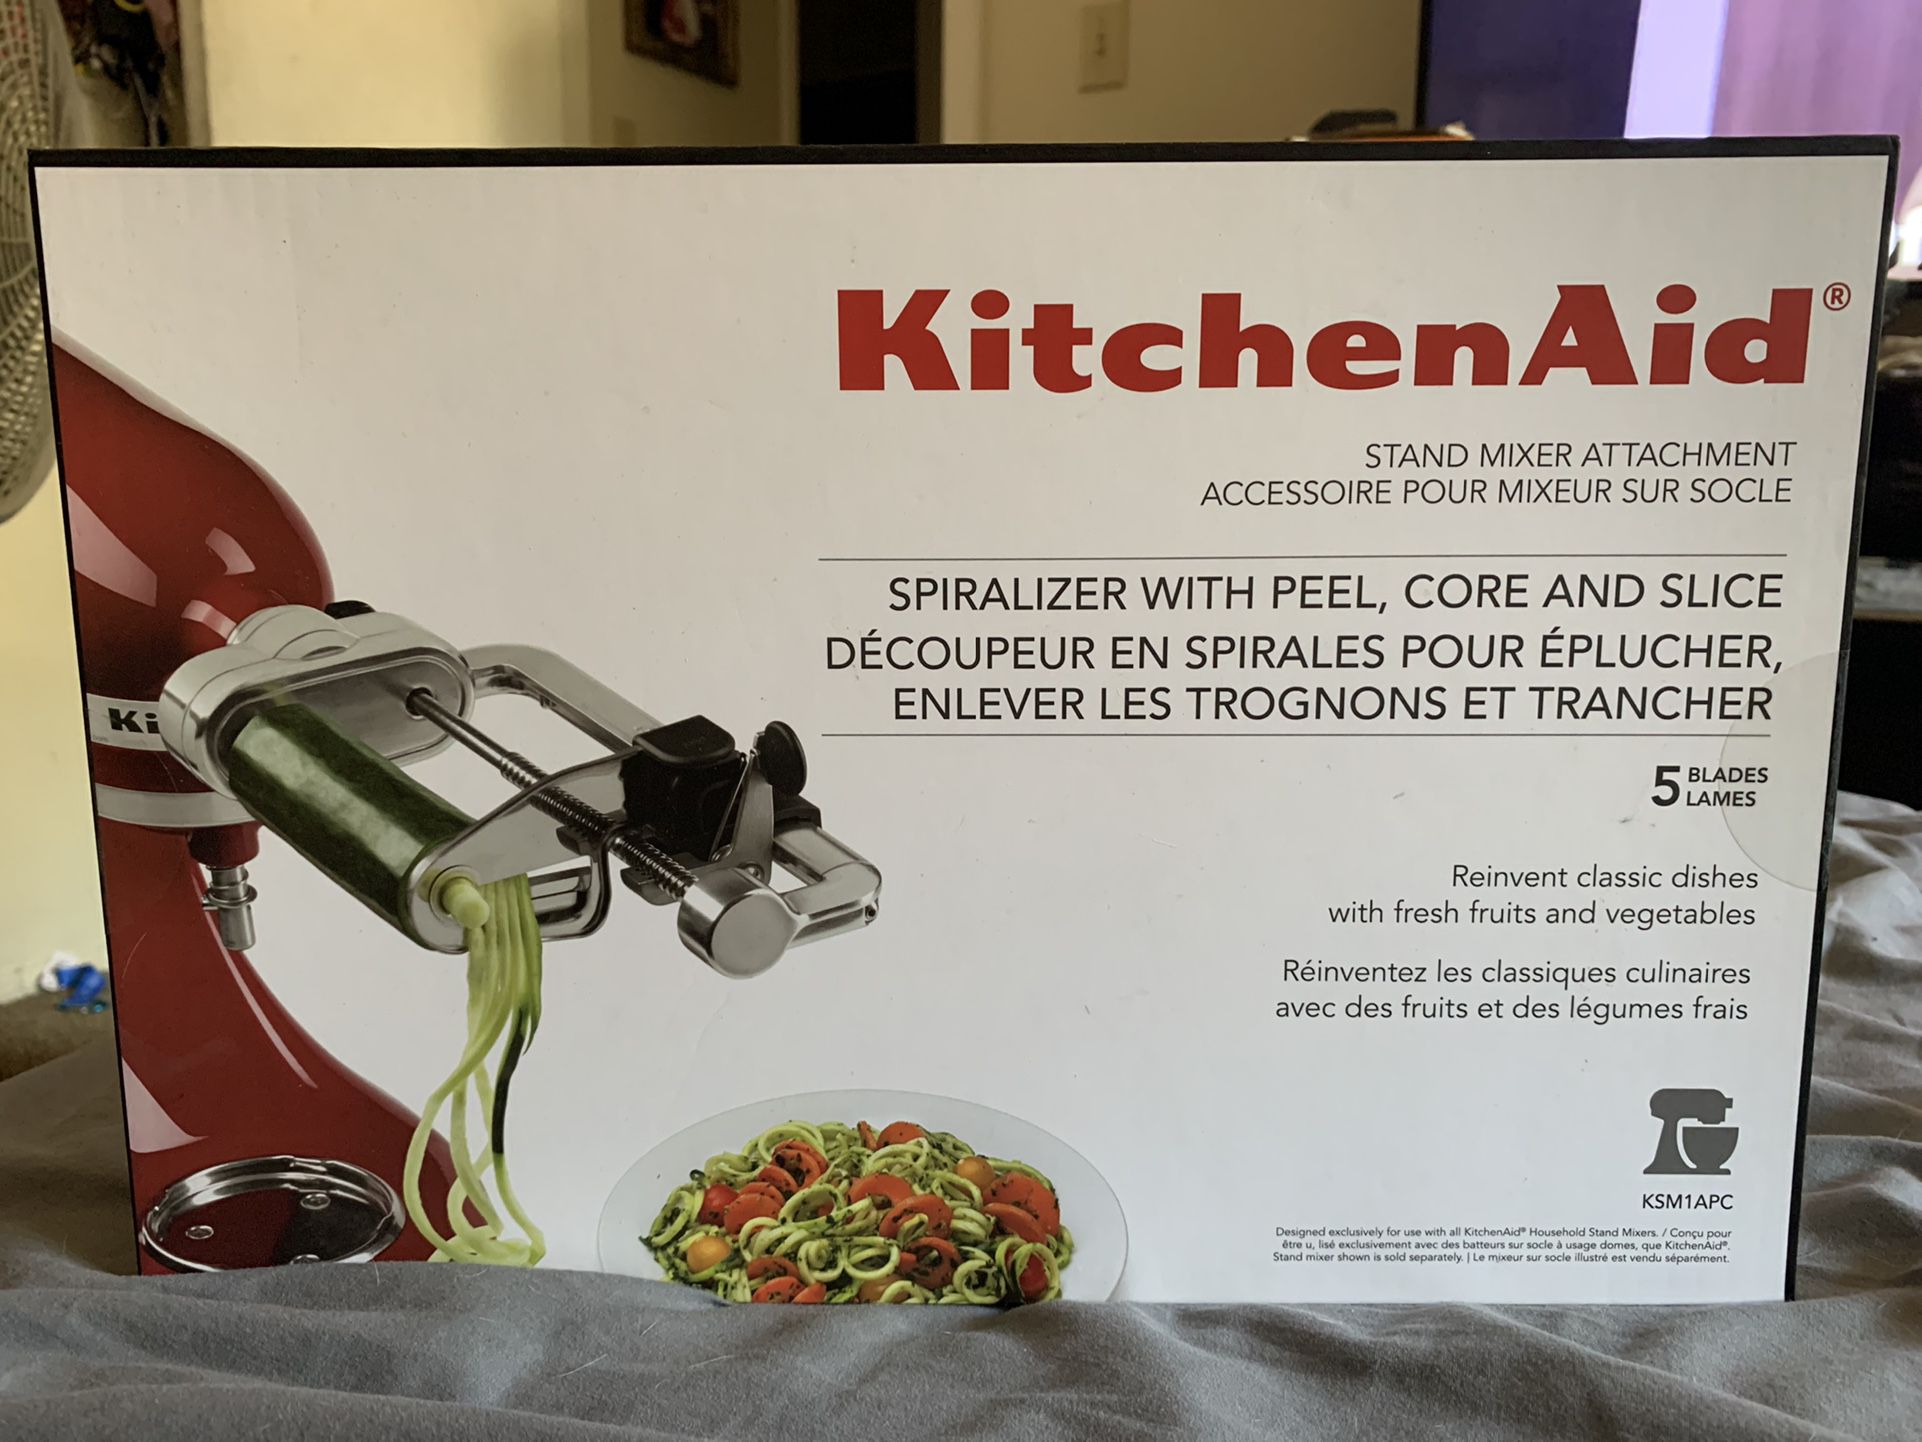 KitchenAid 5-Blade Spiralizer with Peel, Core, and Slice Stand Mixer Attachment KSM1APC